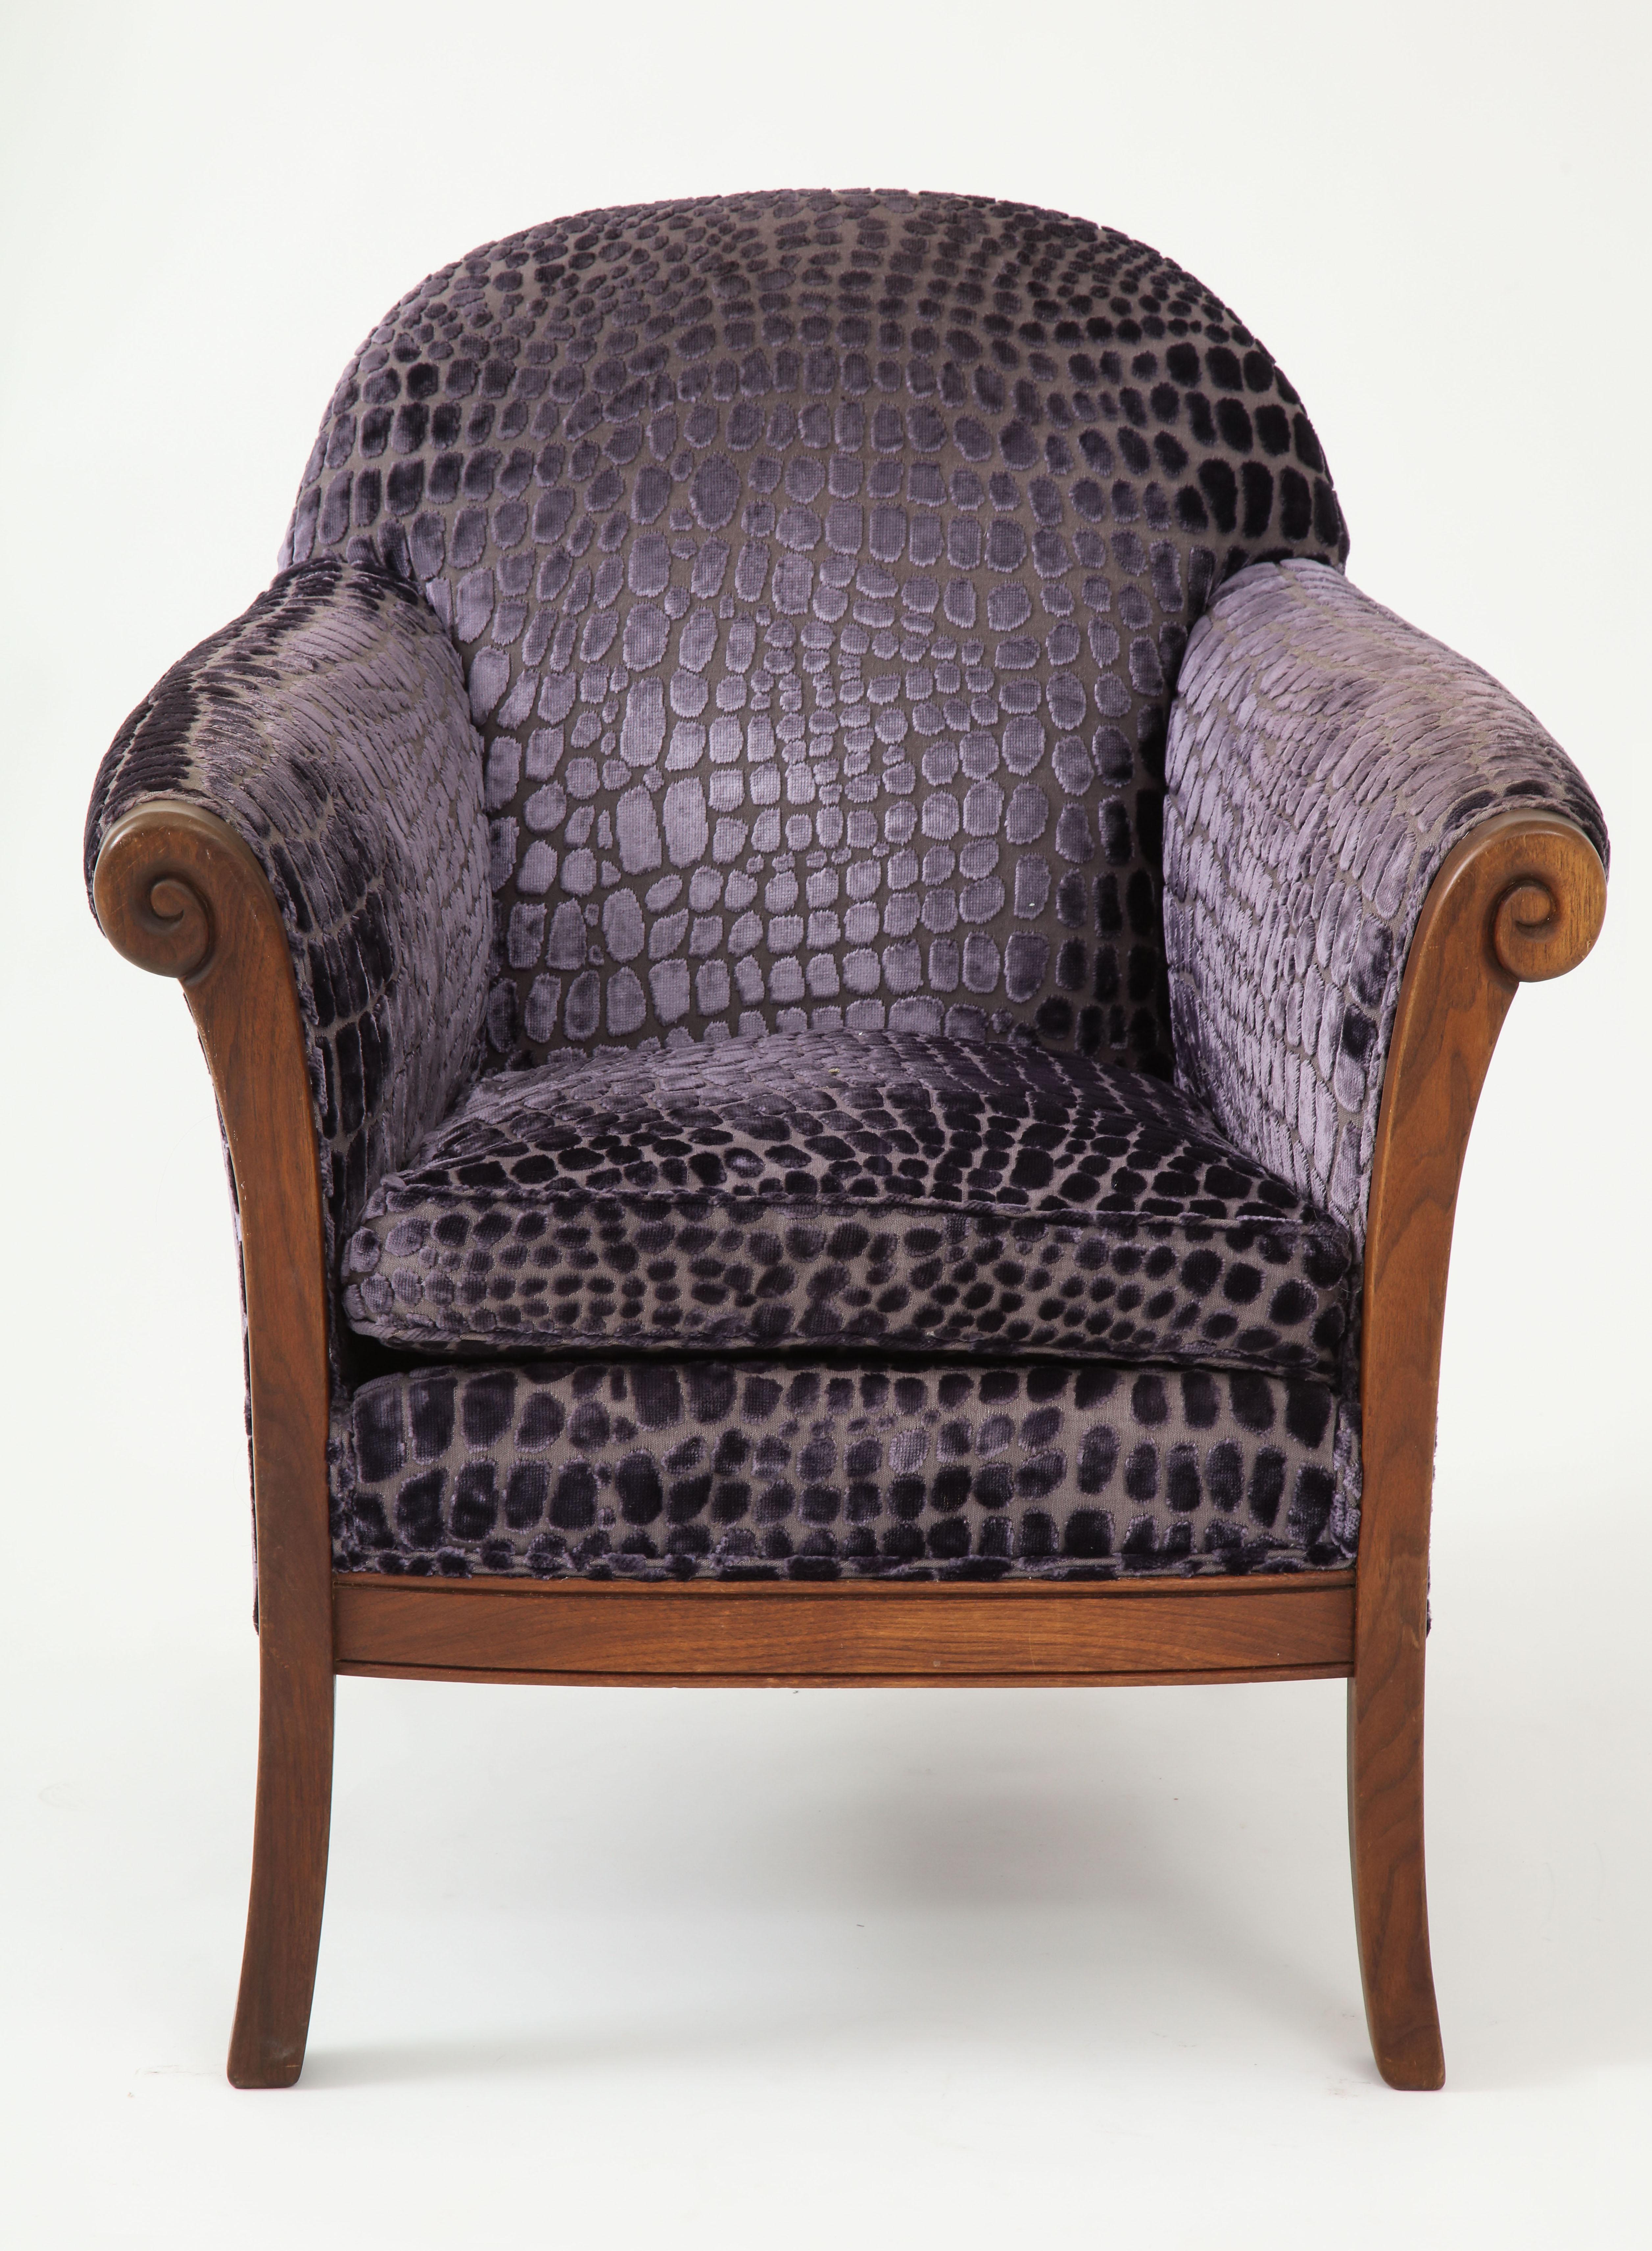 A pair of fine quality comfortable mid century chairs with hand carved mahogany frames and upholstered in a patterned snakeskin purple /grey velvet fabric.